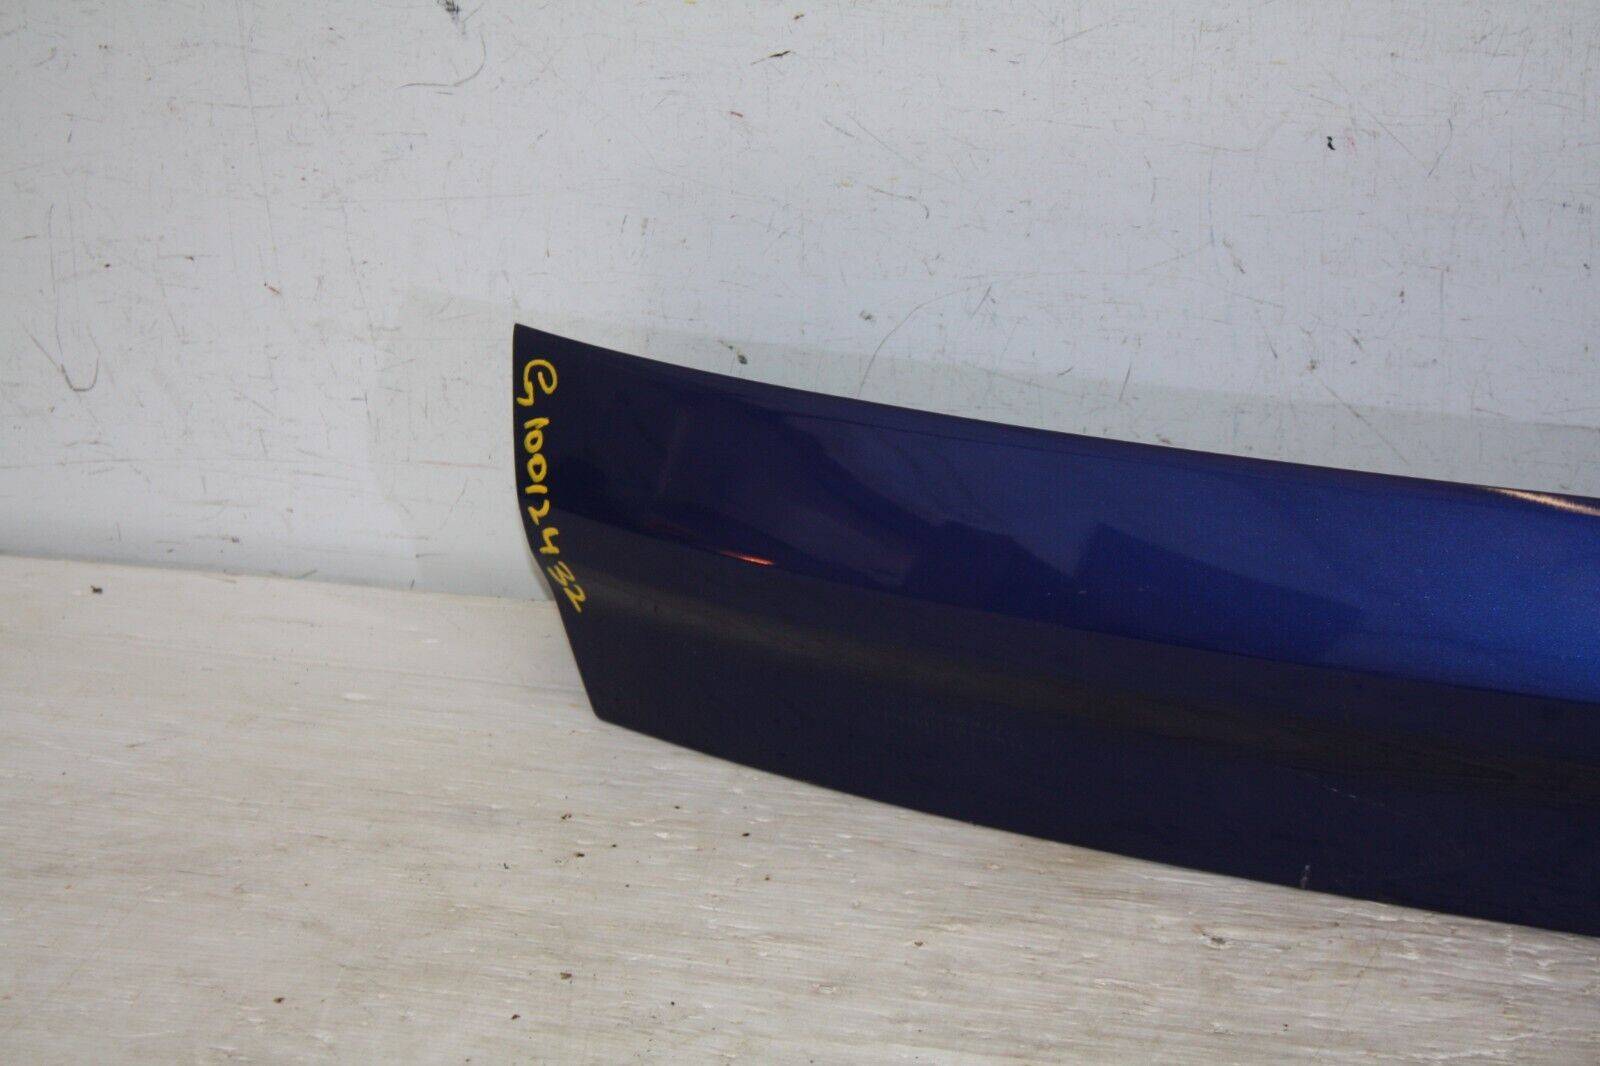 Ford-Kuga-Rear-Tailgate-Boot-Cover-Lower-Section-2013-TO-2016-CJ54-S423A40-A-176173538761-5